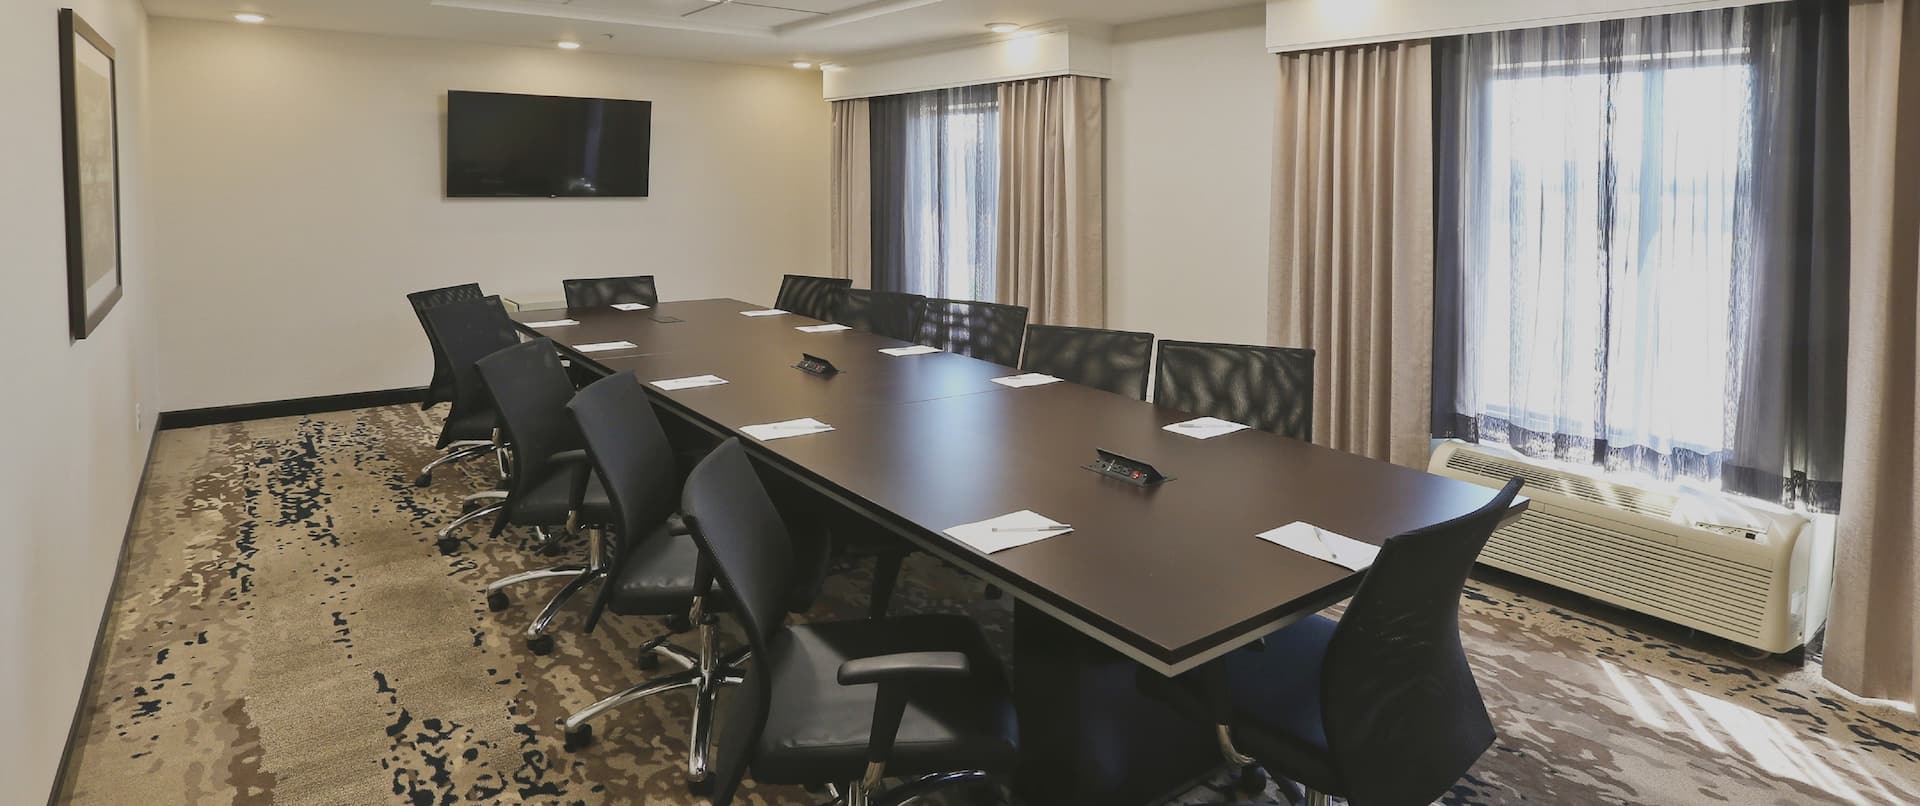 Boardroom with Large Table, Office Chairs and Wall Mounted HDTV